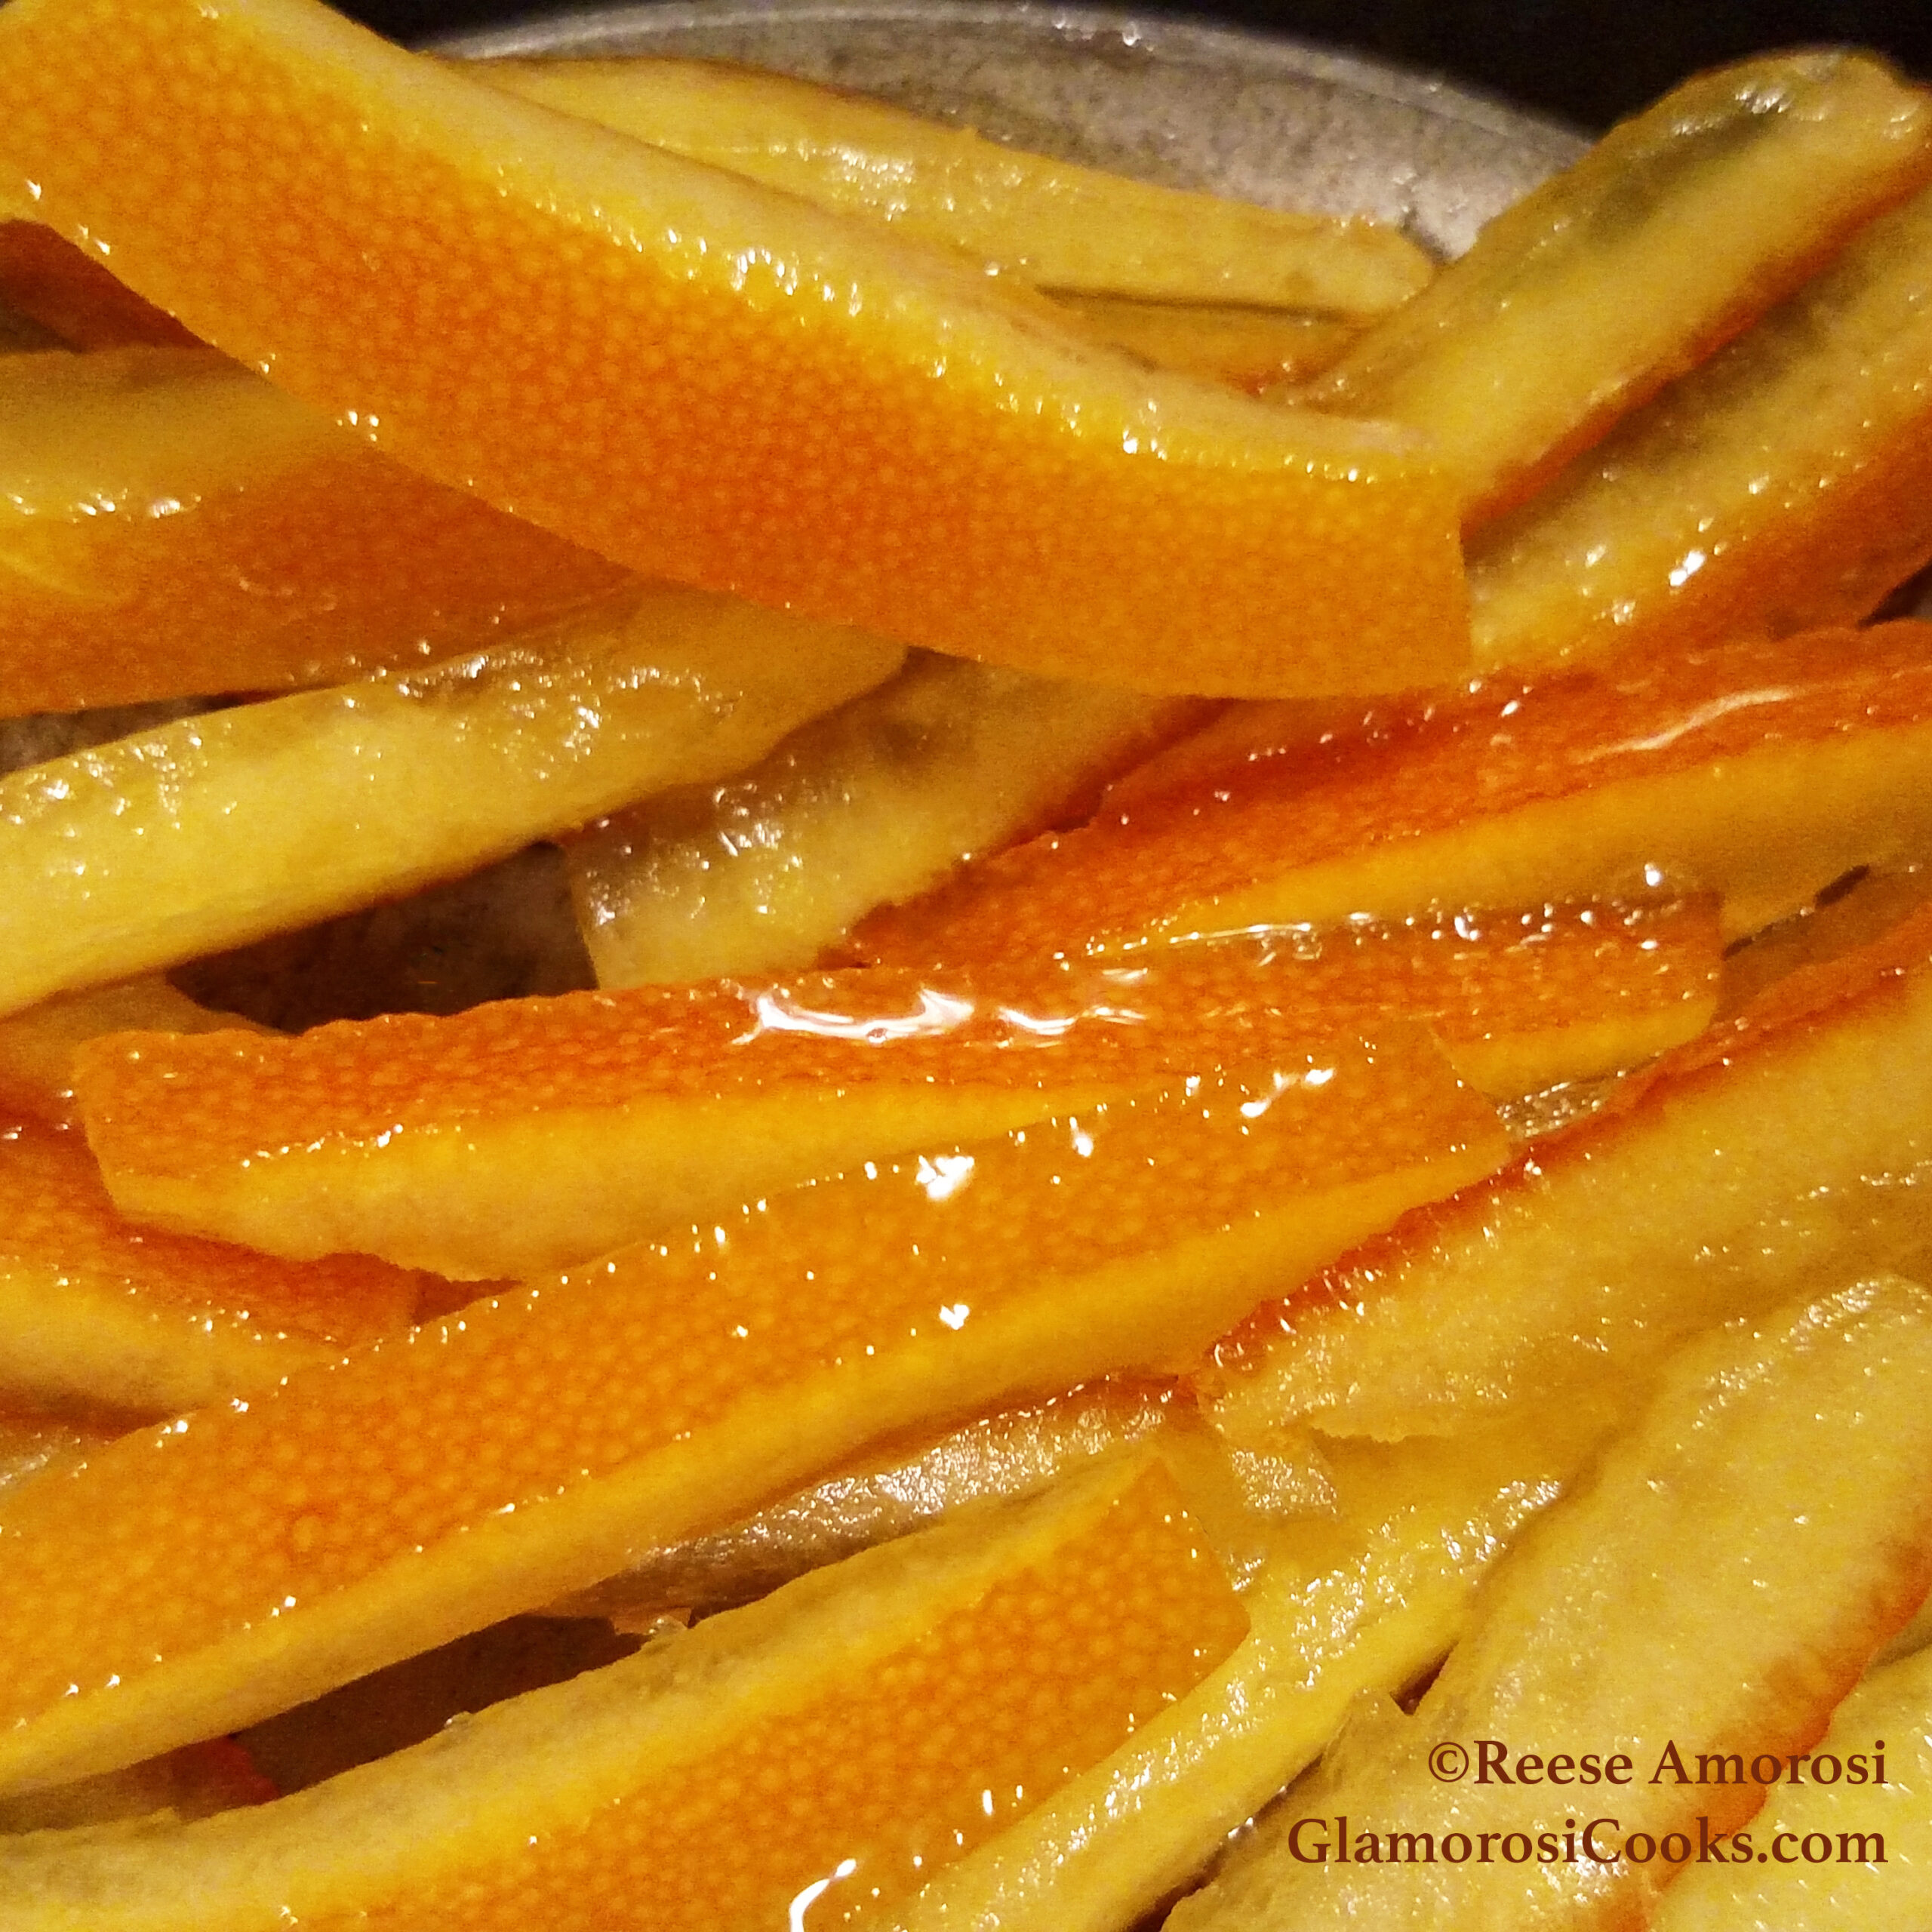 This square photo shows the completed Candied Orange Peel recipe by Reese Amorosi at Glamorosi.com. It is a close-up of strips of orange peel that have been candied by cooking them in simple syrup (sugar and water). The outside of each peel is deep orange, and the pith (the inside part of the peel) is pale orange. They will be used to garnish desserts, baked good, drinks and cheese trays.